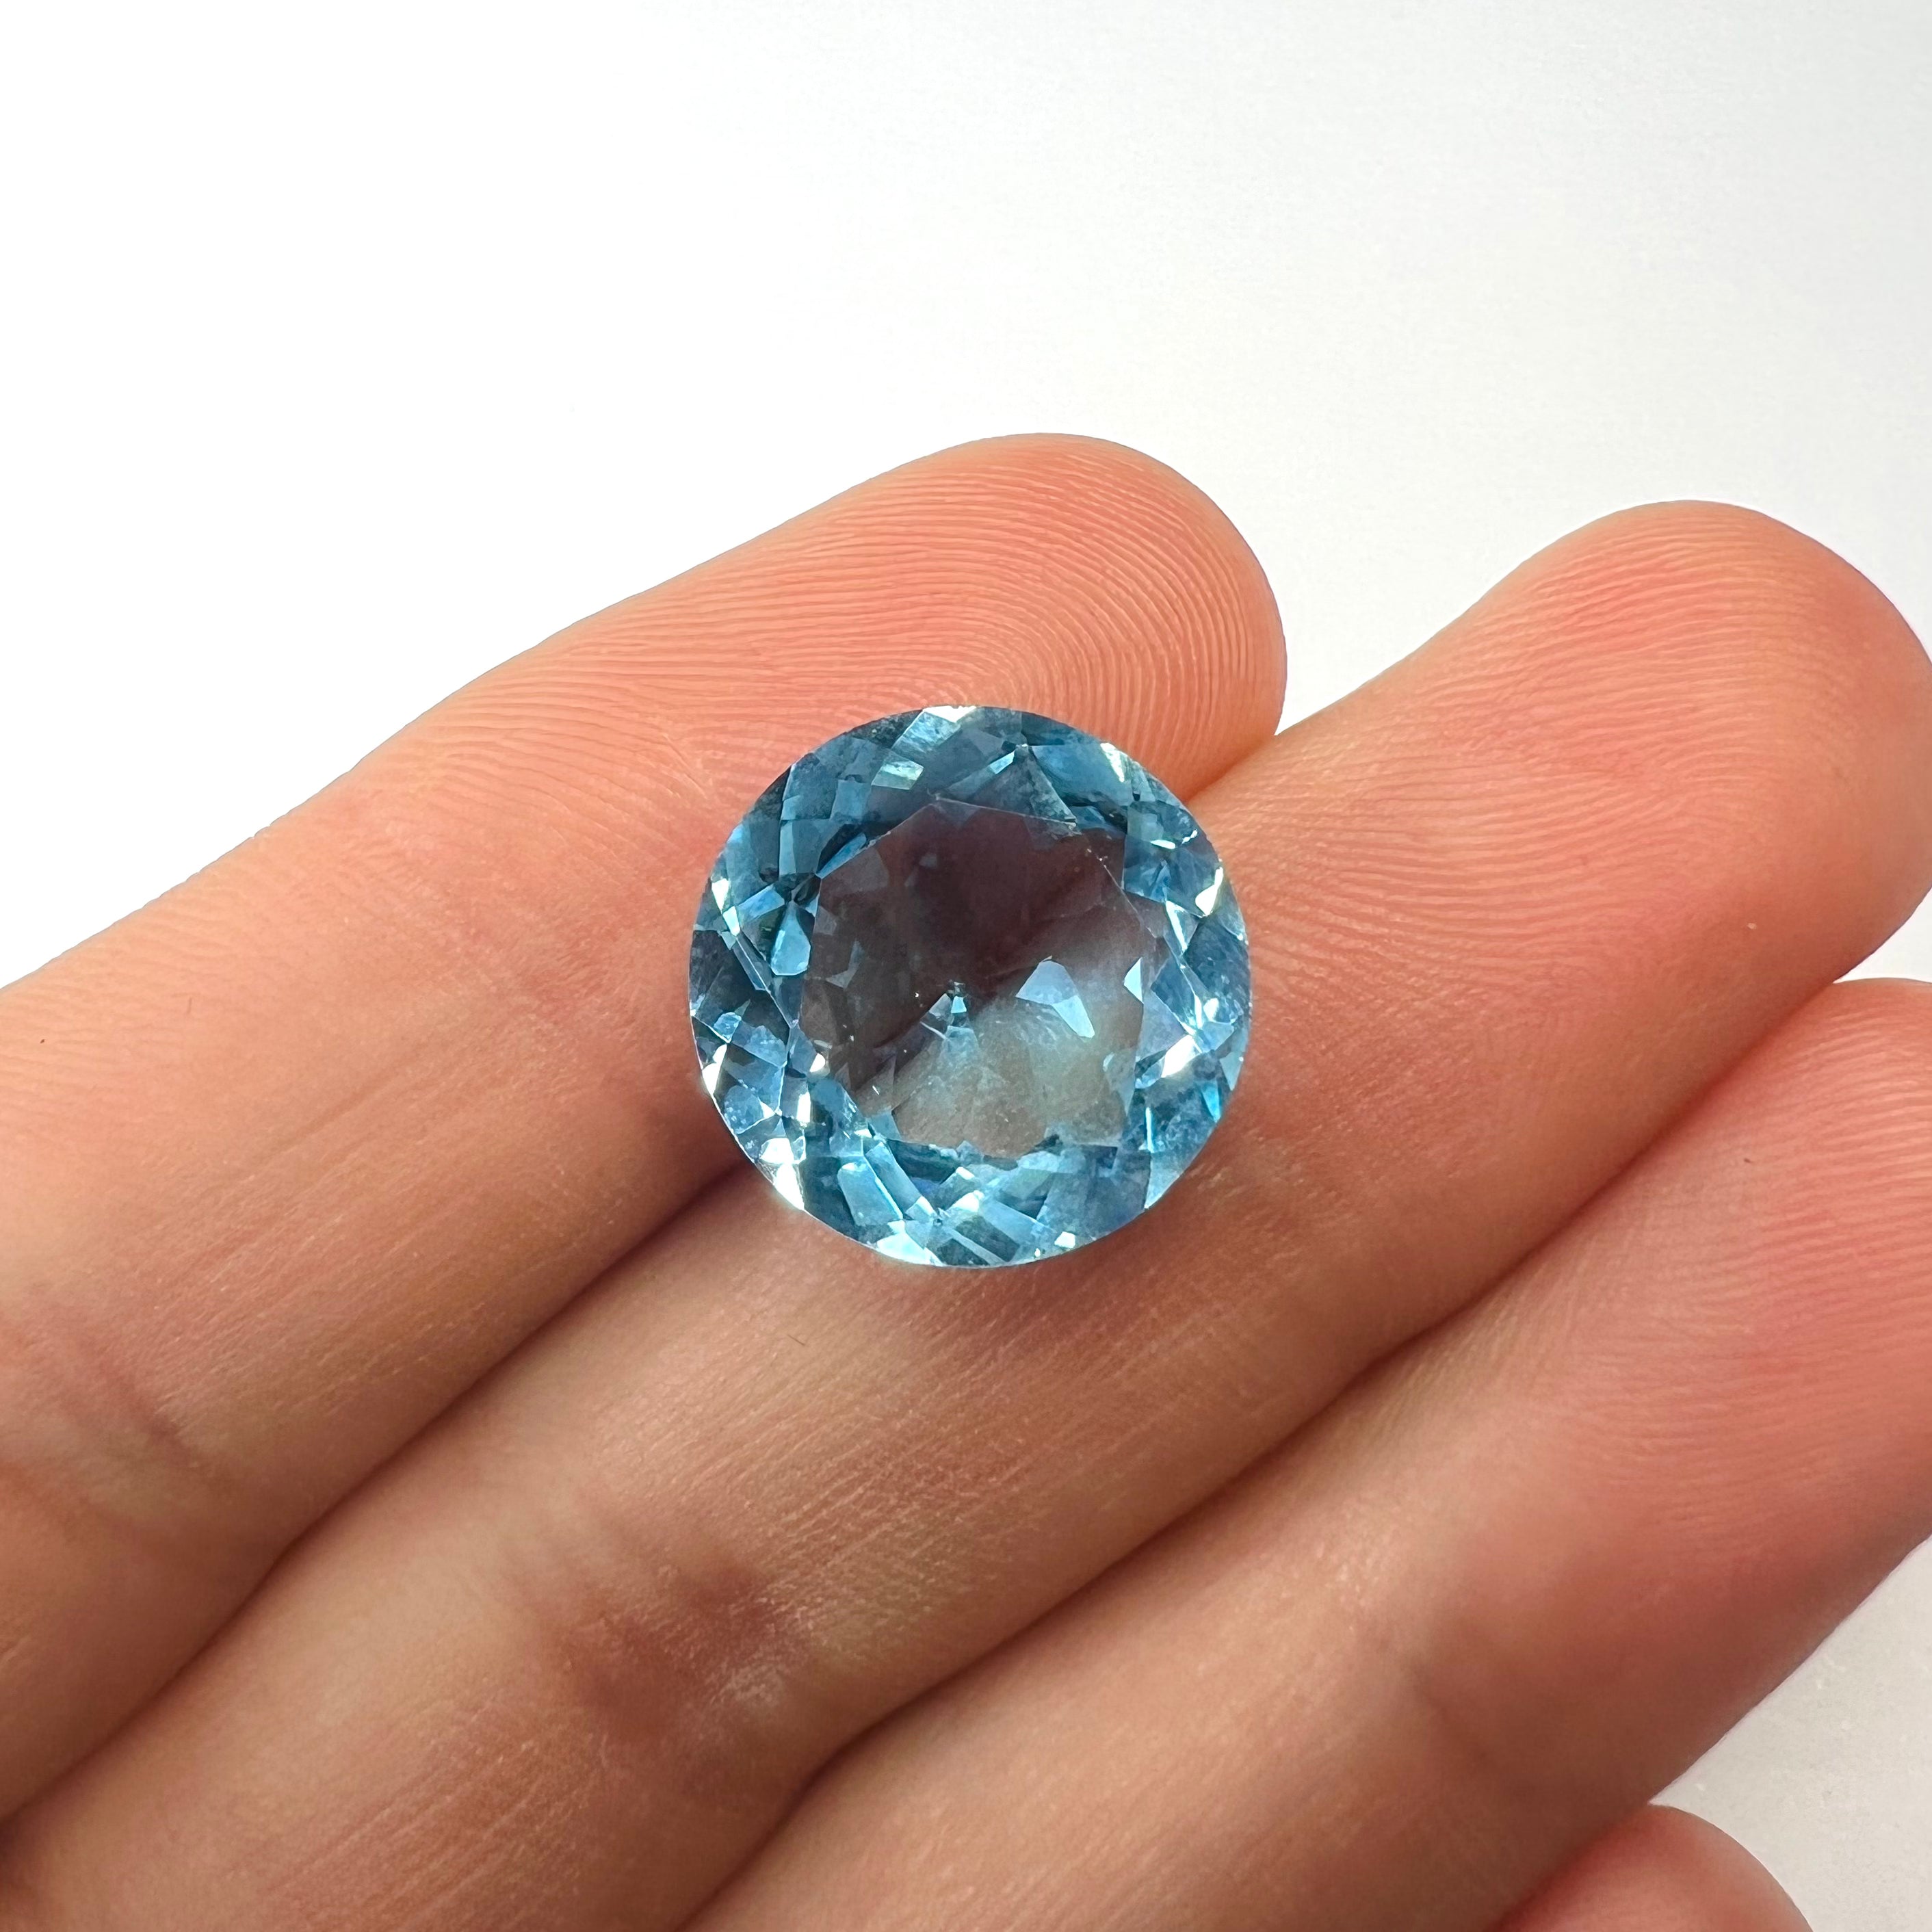 12.67CTW Loose Natural Round Cut Topaz 14.80x7.80mm Earth mined Gemstone